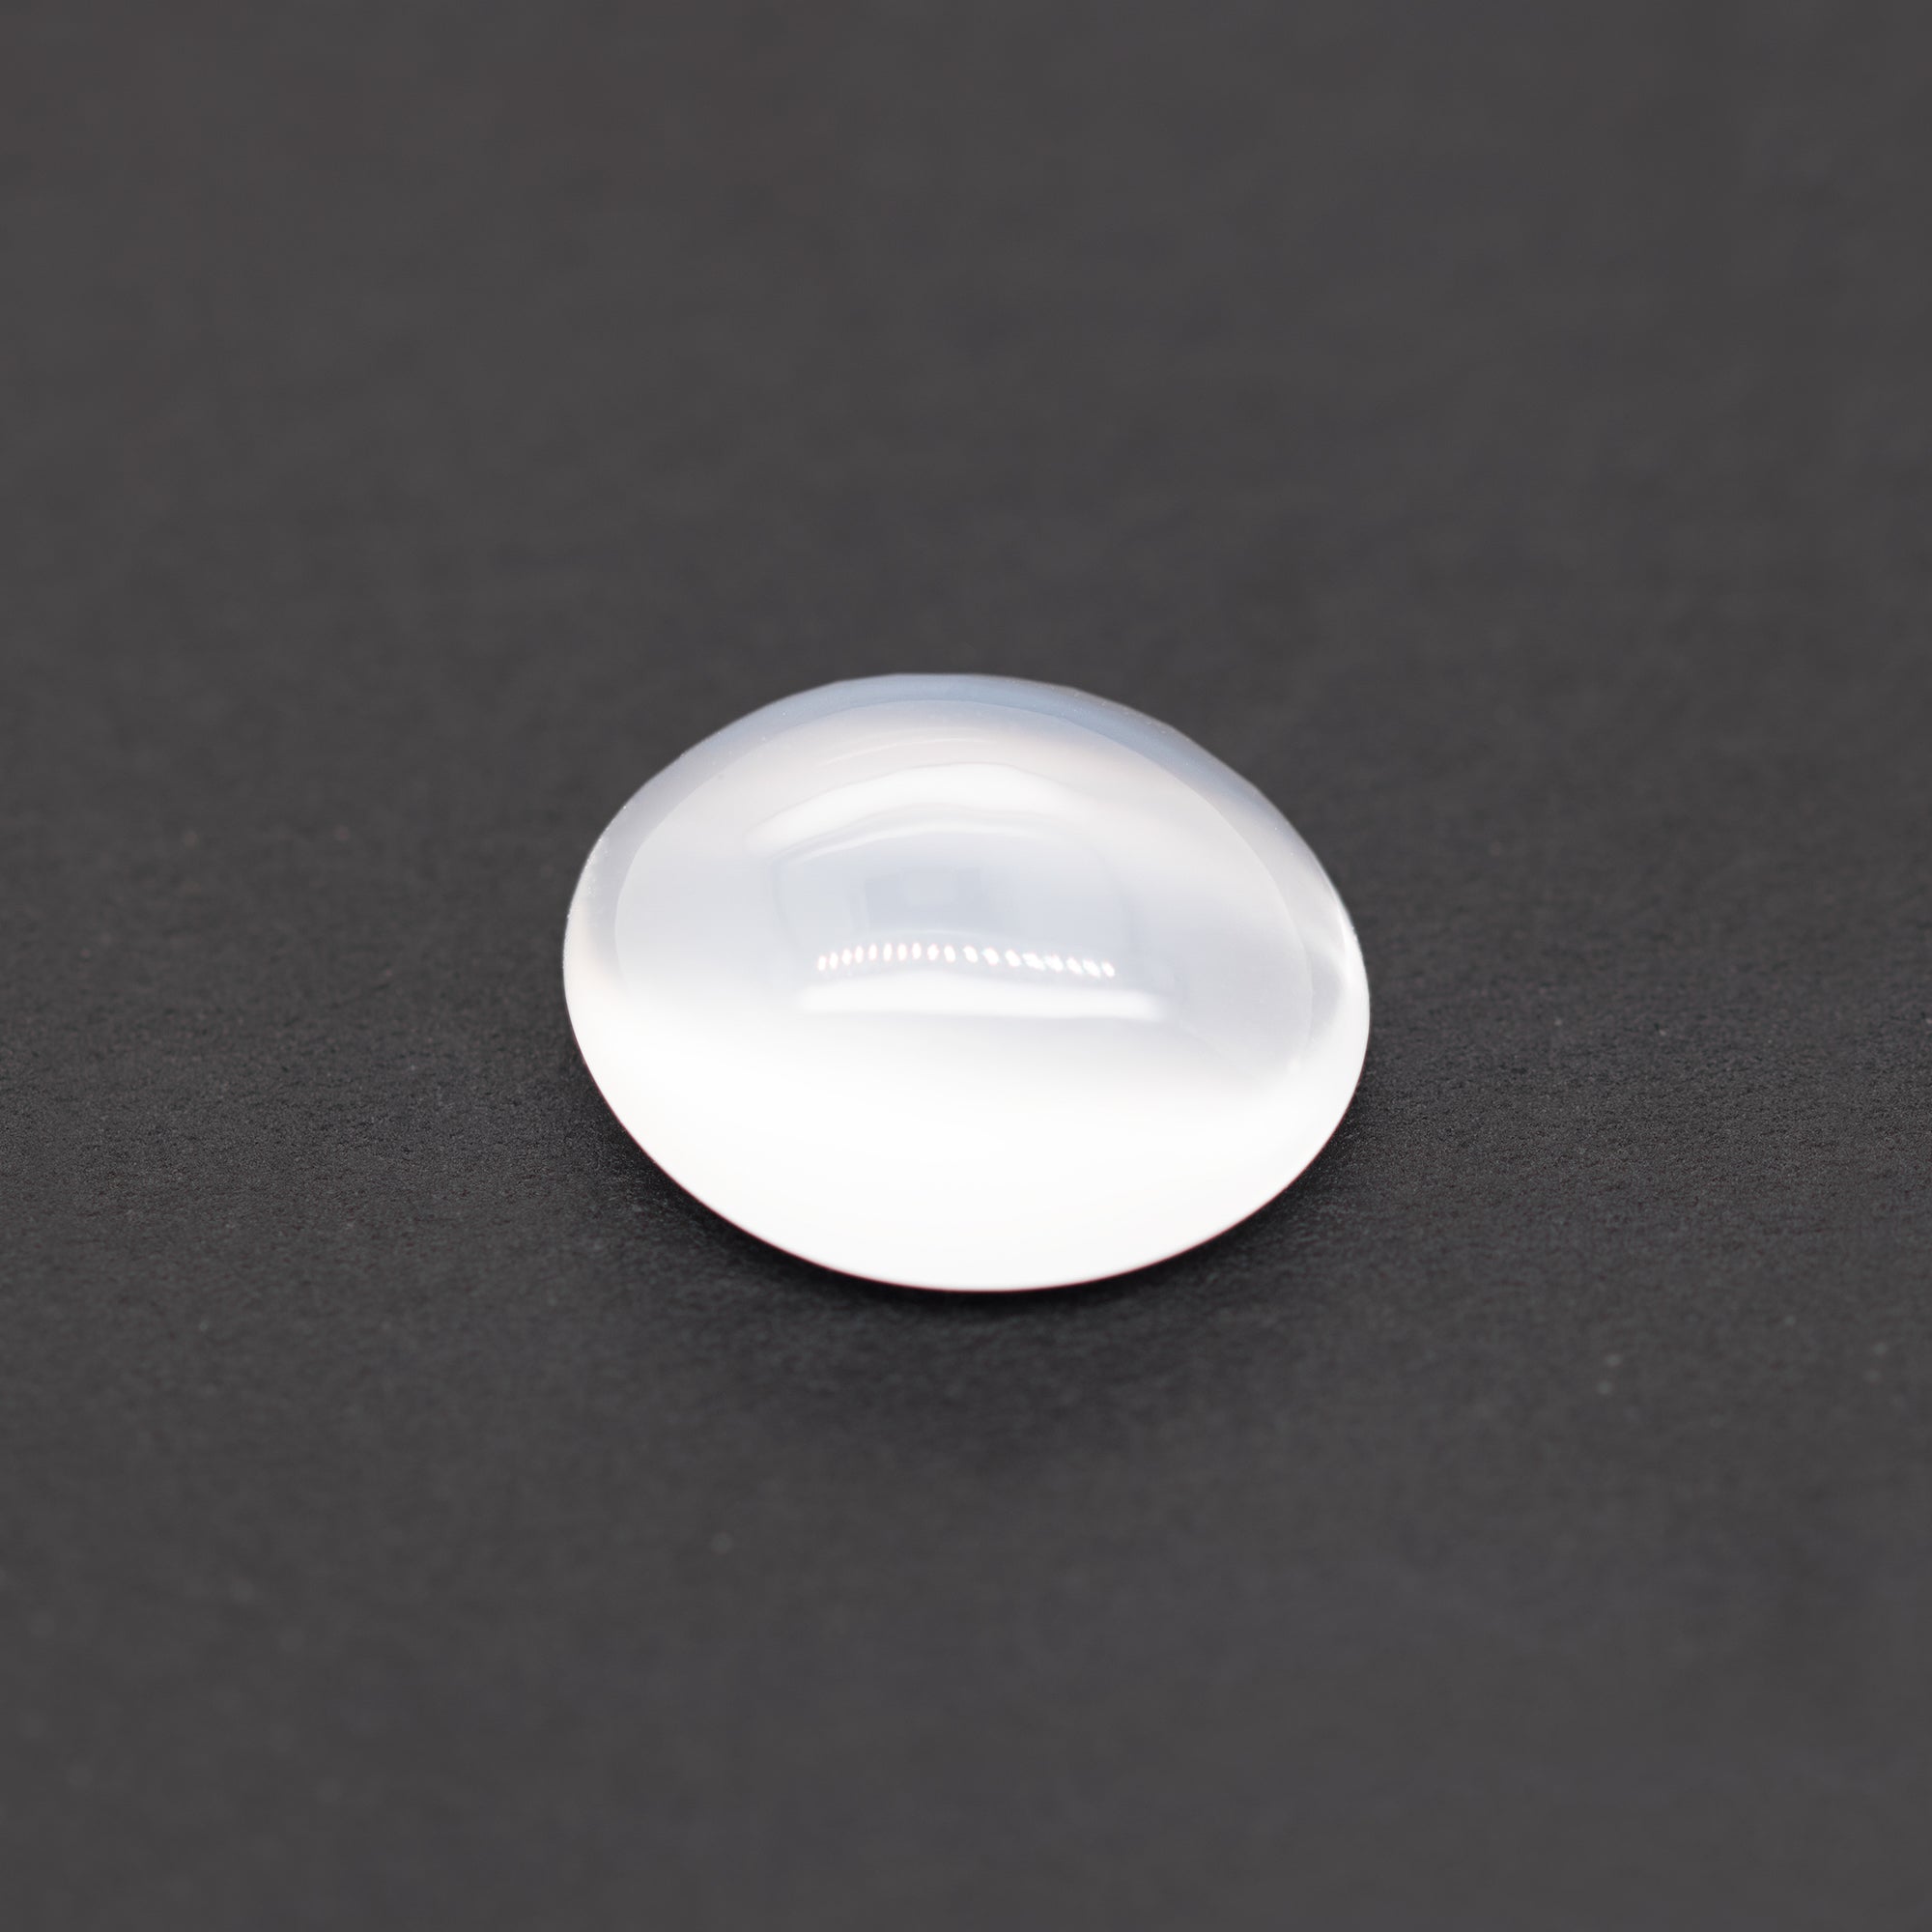 Moonstone - white, oval, 13.3x15.9 mm, 9.43 cts, No. MST10001